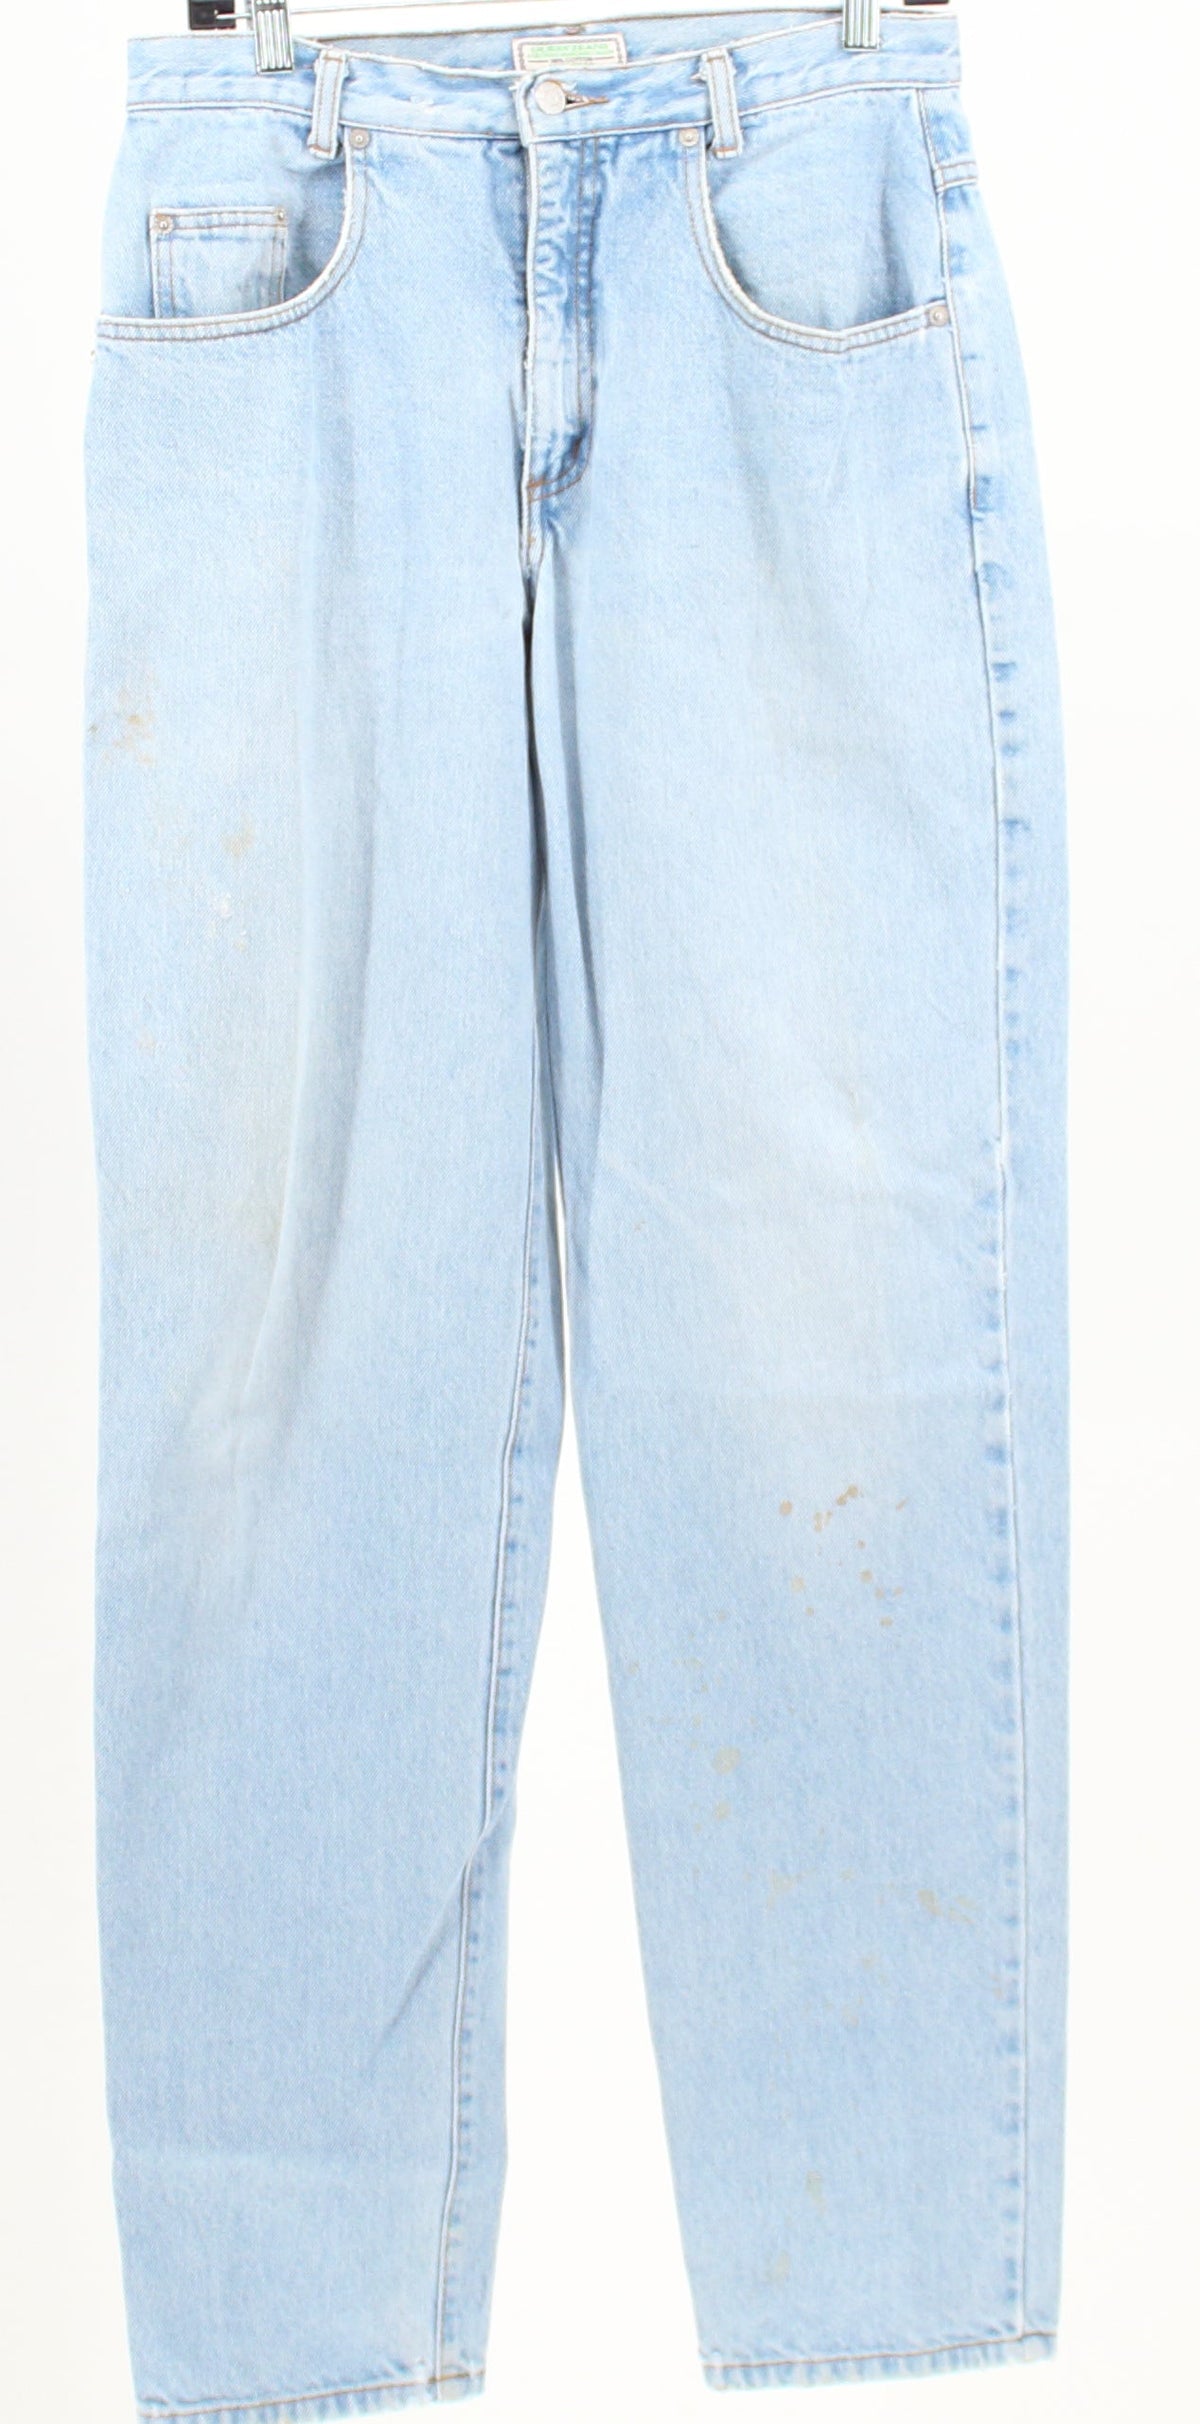 Guess Light Washed Straight Leg Jeans